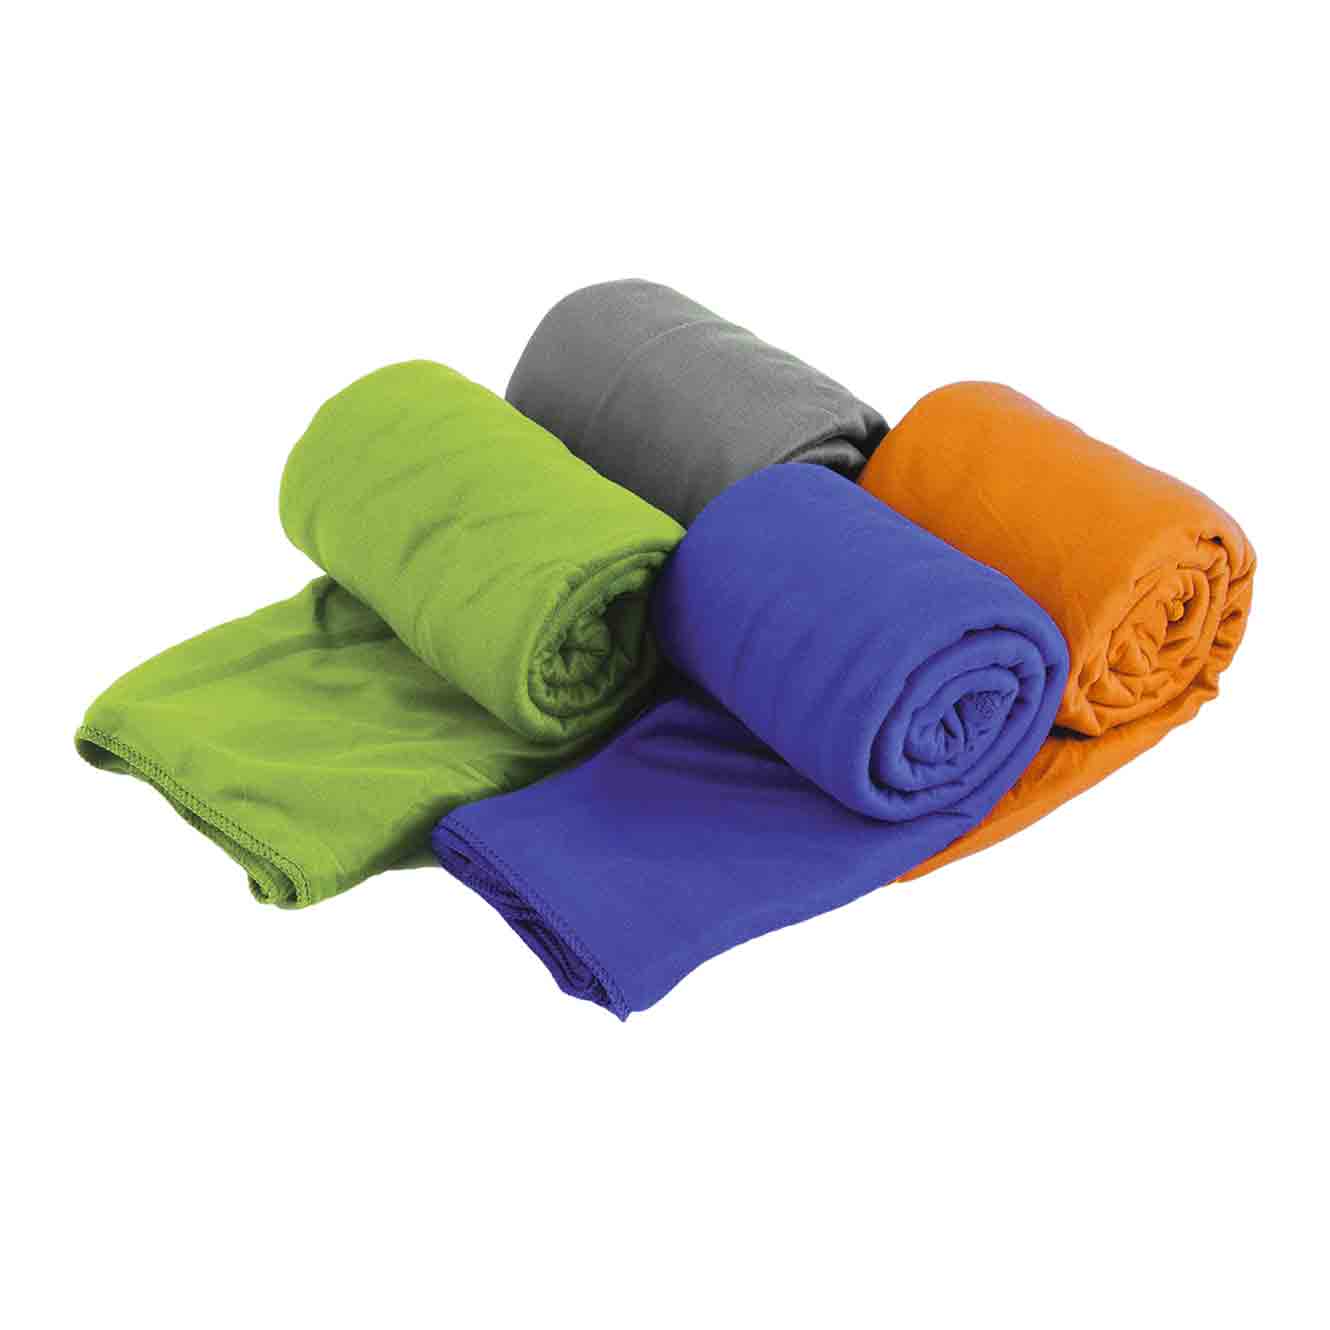 Sea to Summit Pocket Towel, Large, Outback